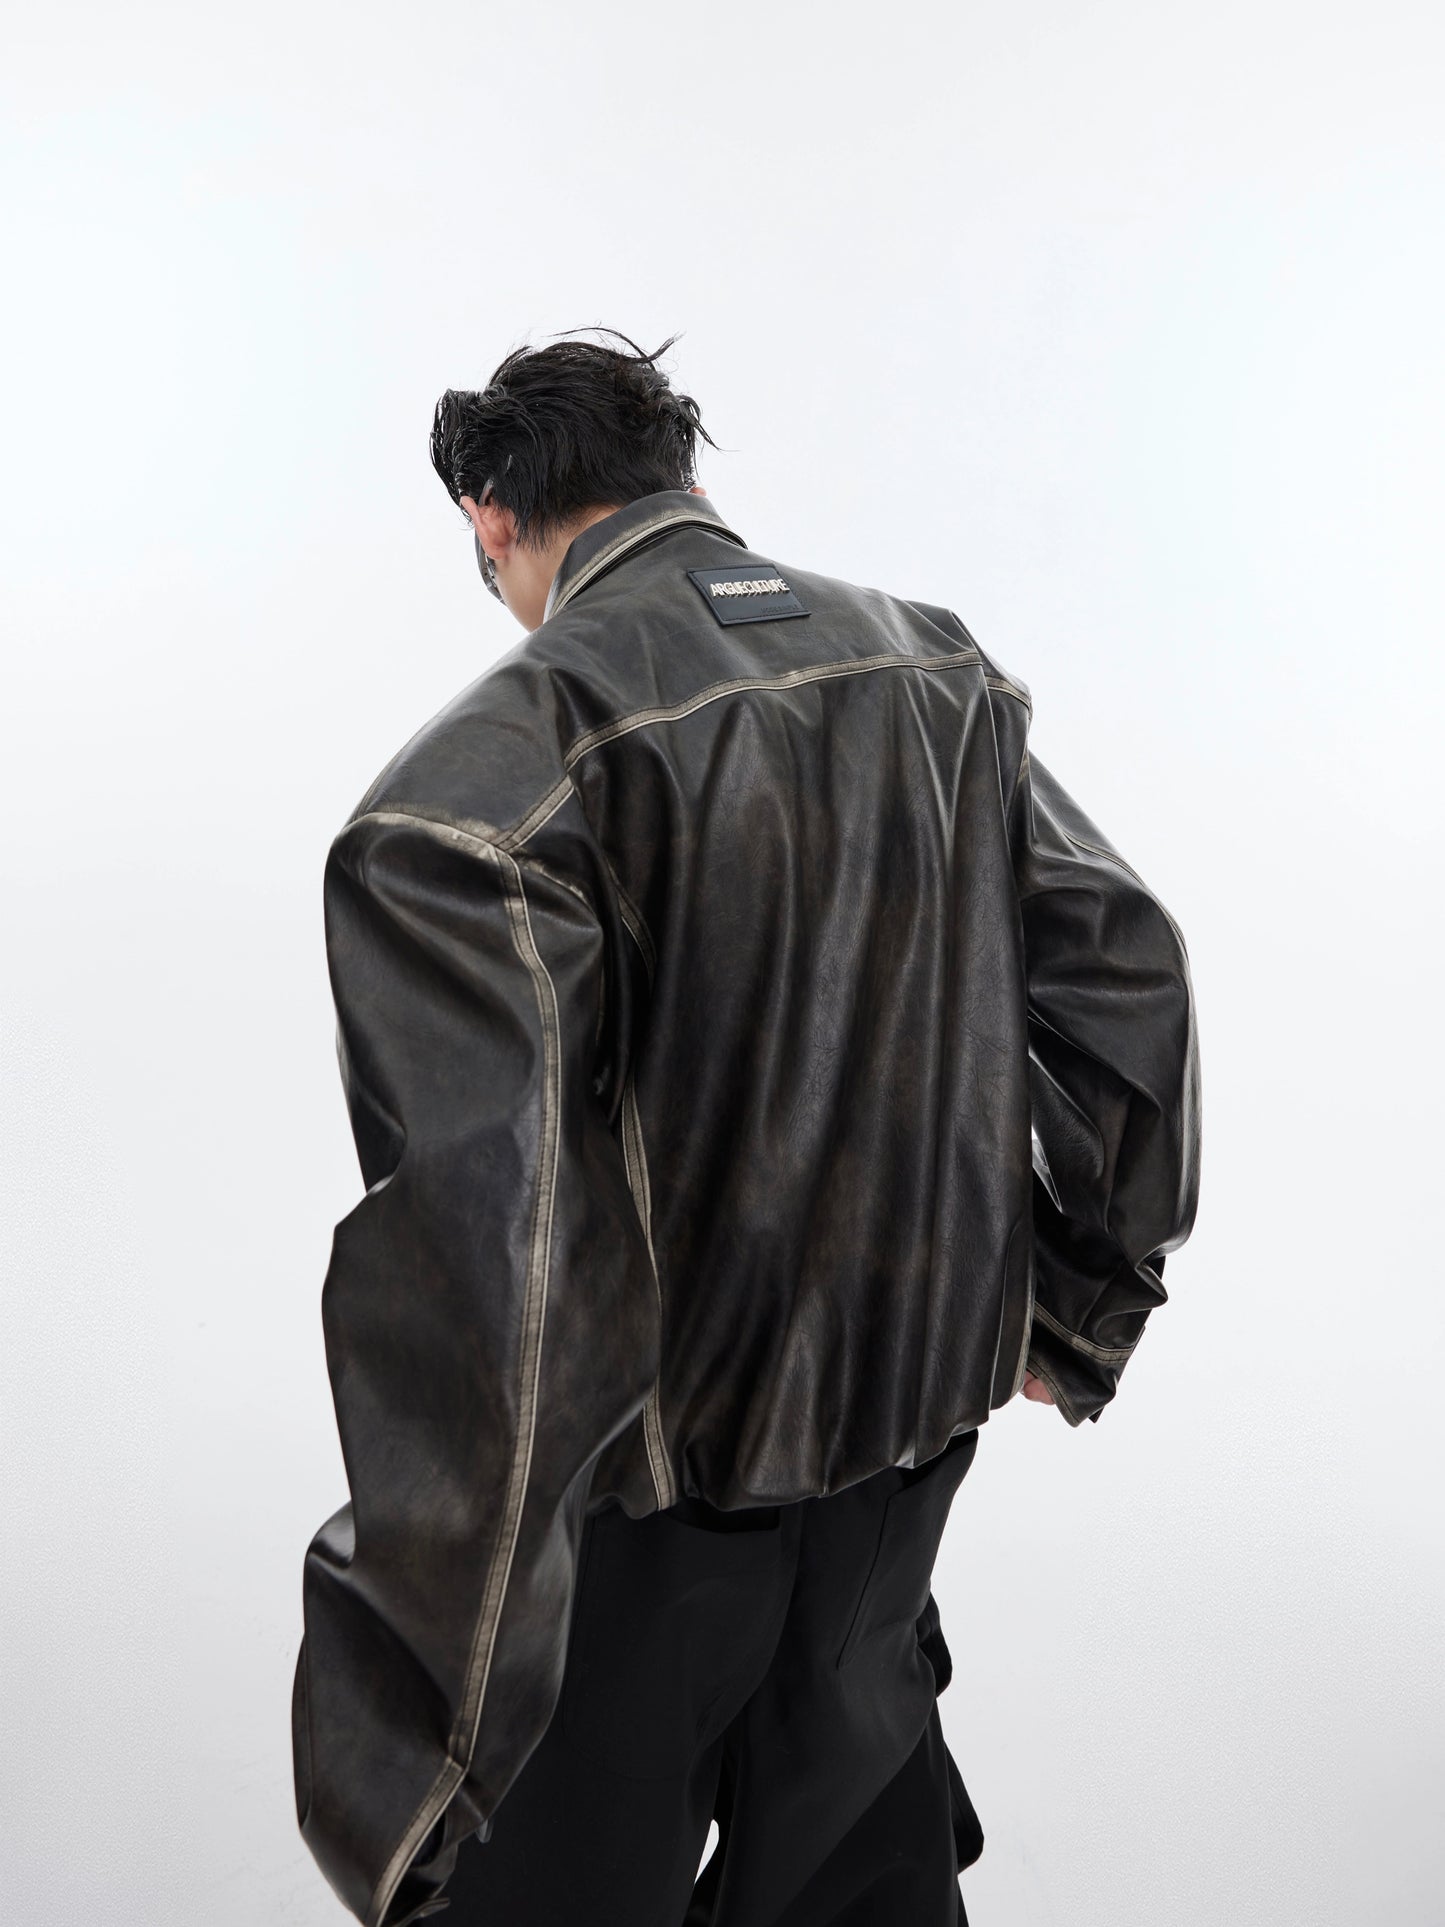 Cultur E24ss, a heavyweight vintage rubbed leather distressed padded-shoulder jacket, a jacket, a niche cropped silhouette, a loose-fitting leather jacket